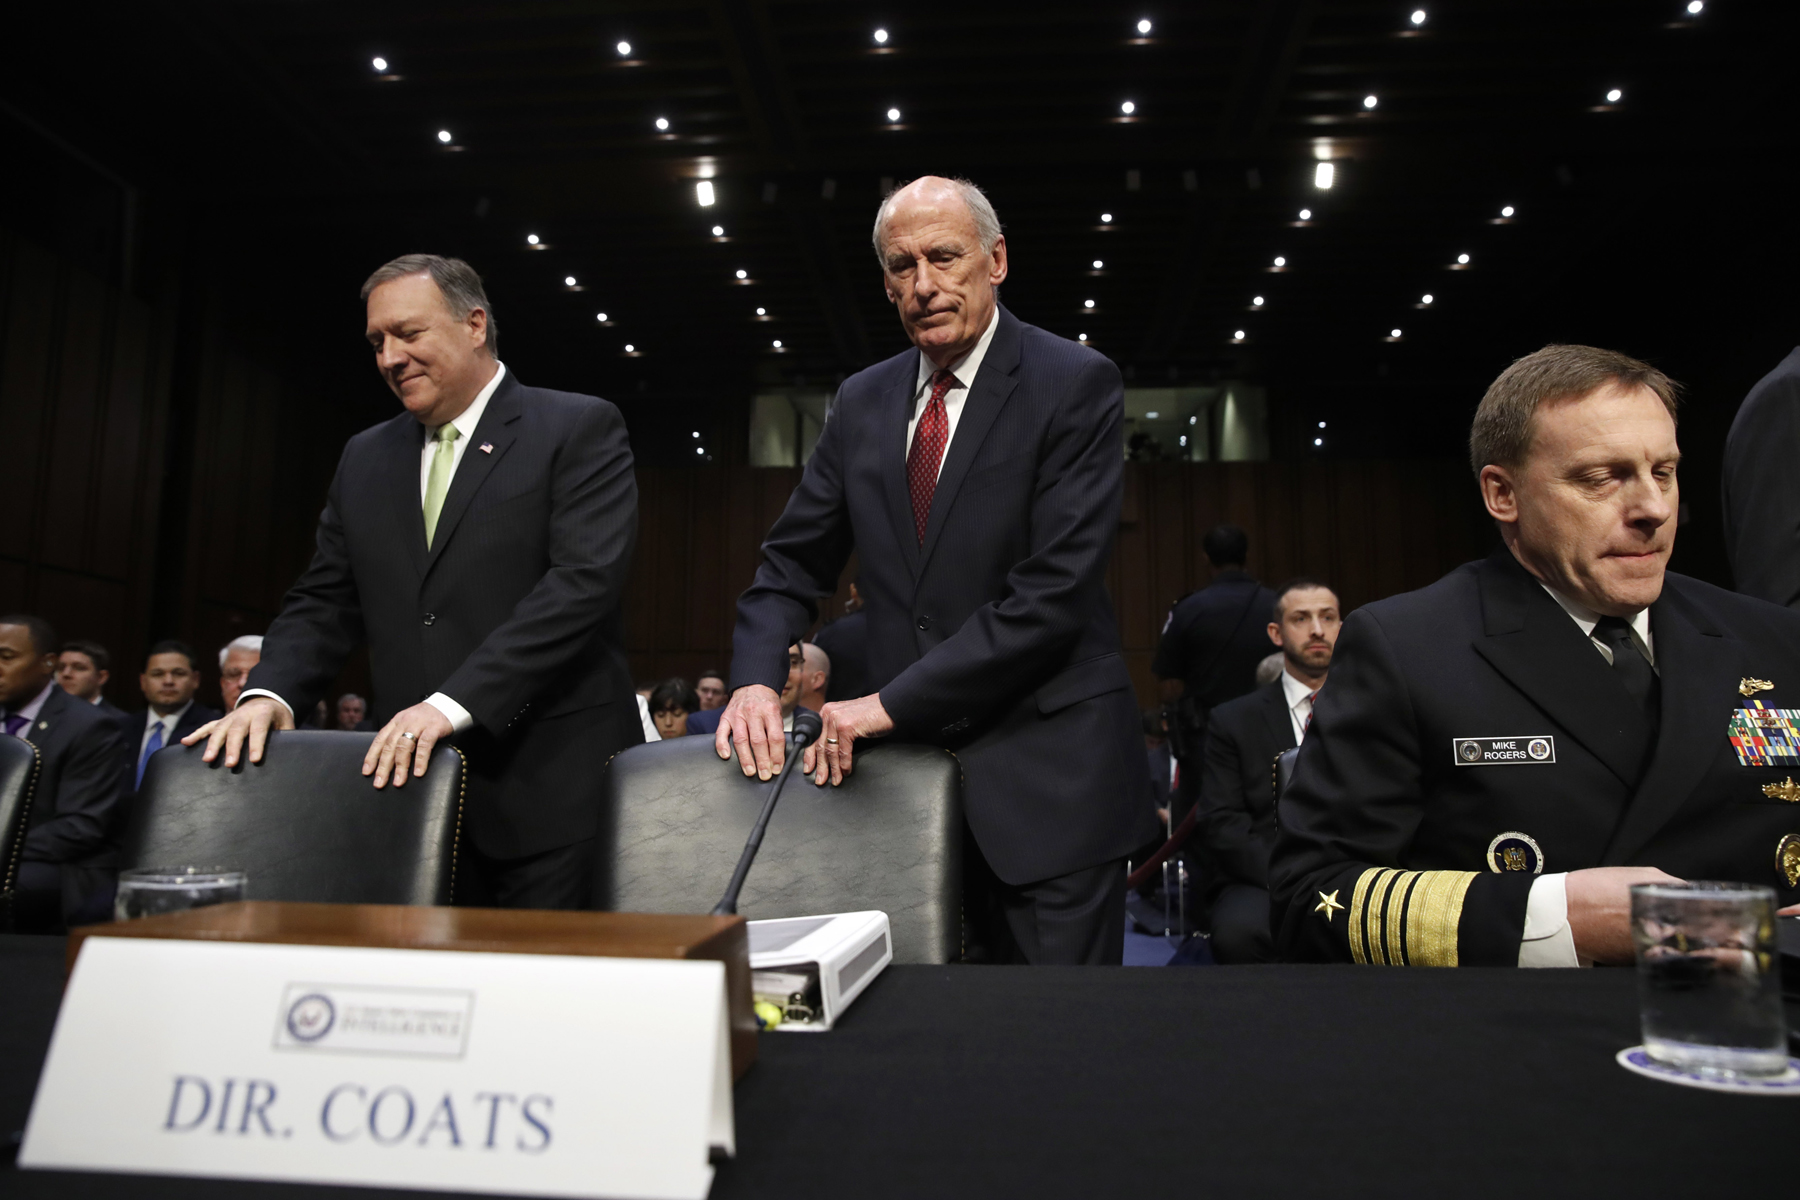 CIA Director Mike Pompeo (left), Director of National Intelligence Dan Coats, and National Security Agency Director Adm. Michael Rogers take their seats on Capitol Hill in Washington, May 11, 2017, prior to testifying before the Senate Intelligence Committee hearing on major threats facing the U.S. (Photo: Jacquelyn Martin/AP)